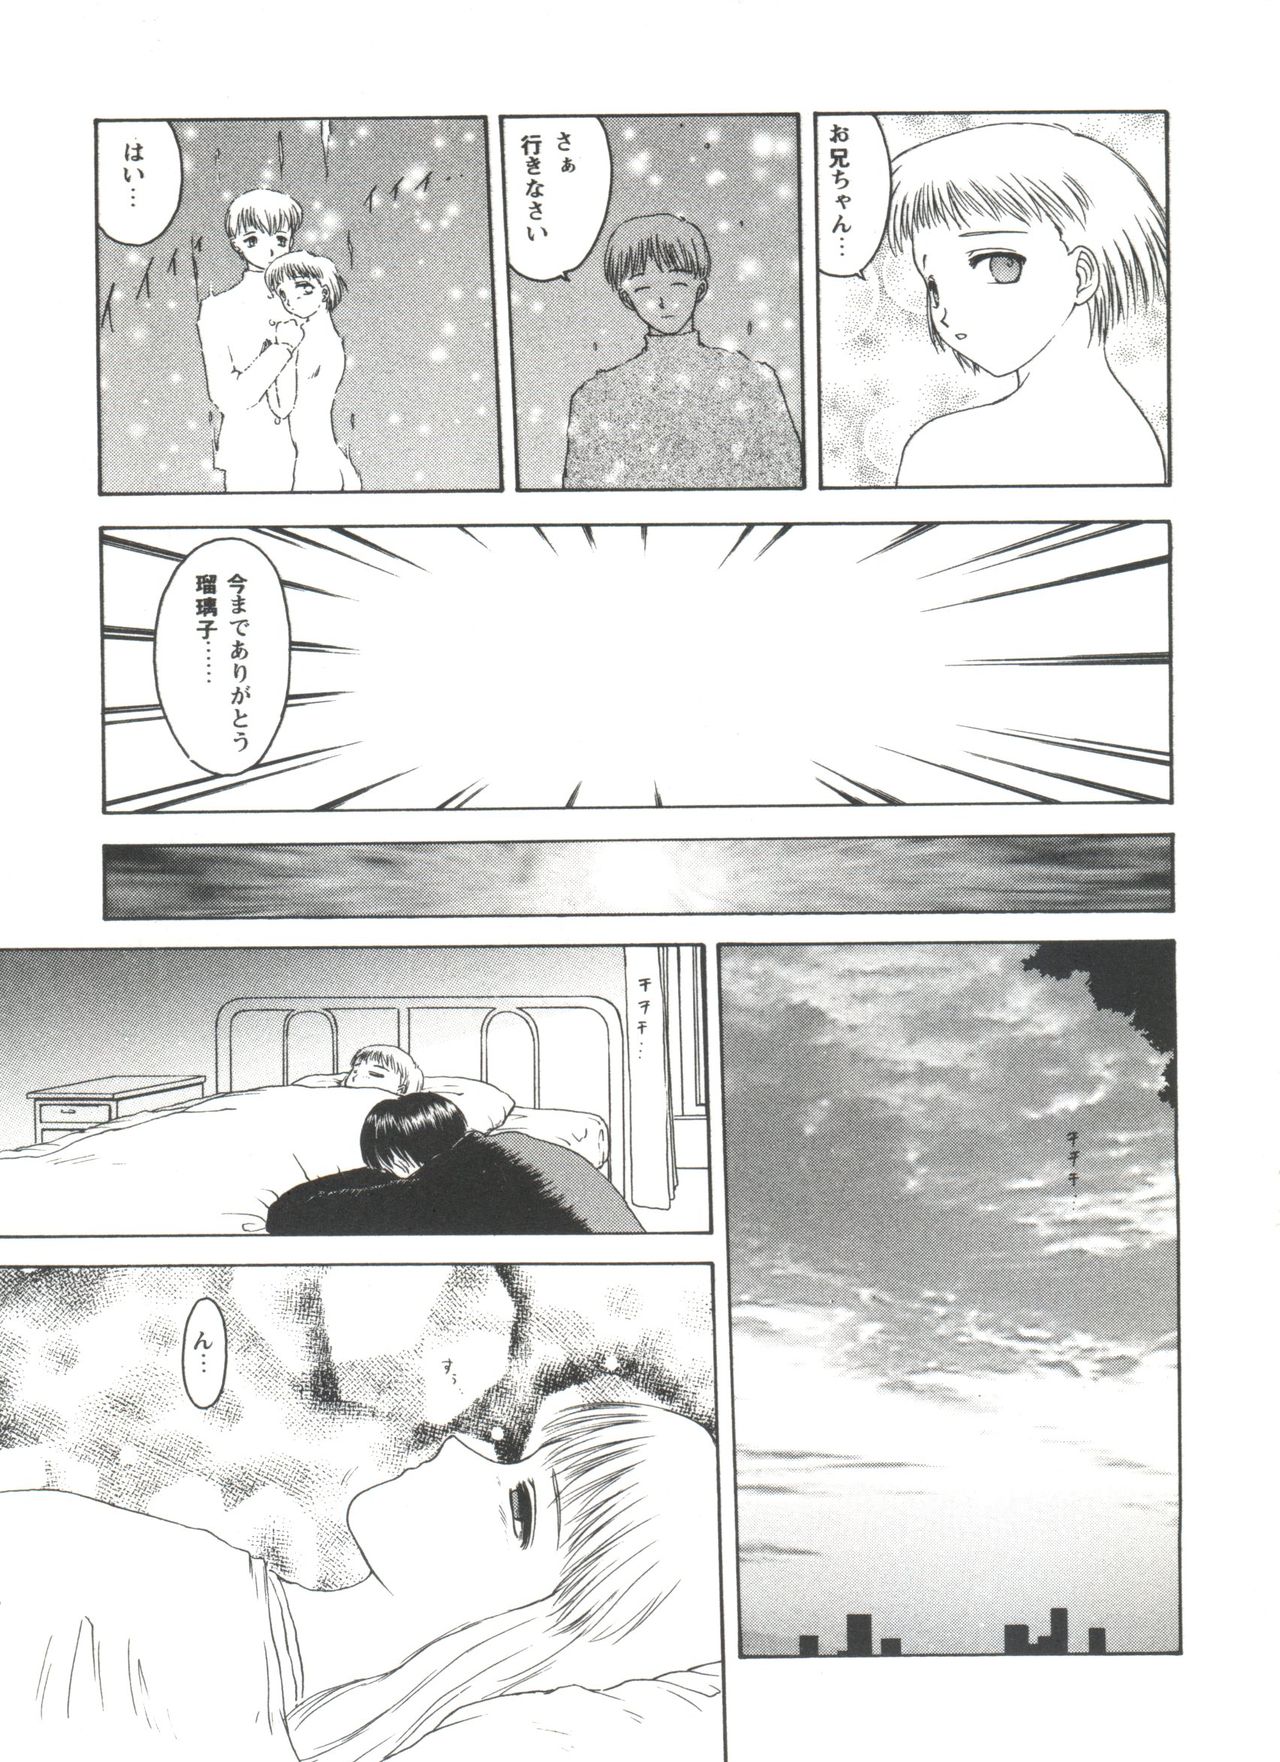 [Anthology] Love Heart 4 (To Heart, White Album) page 39 full